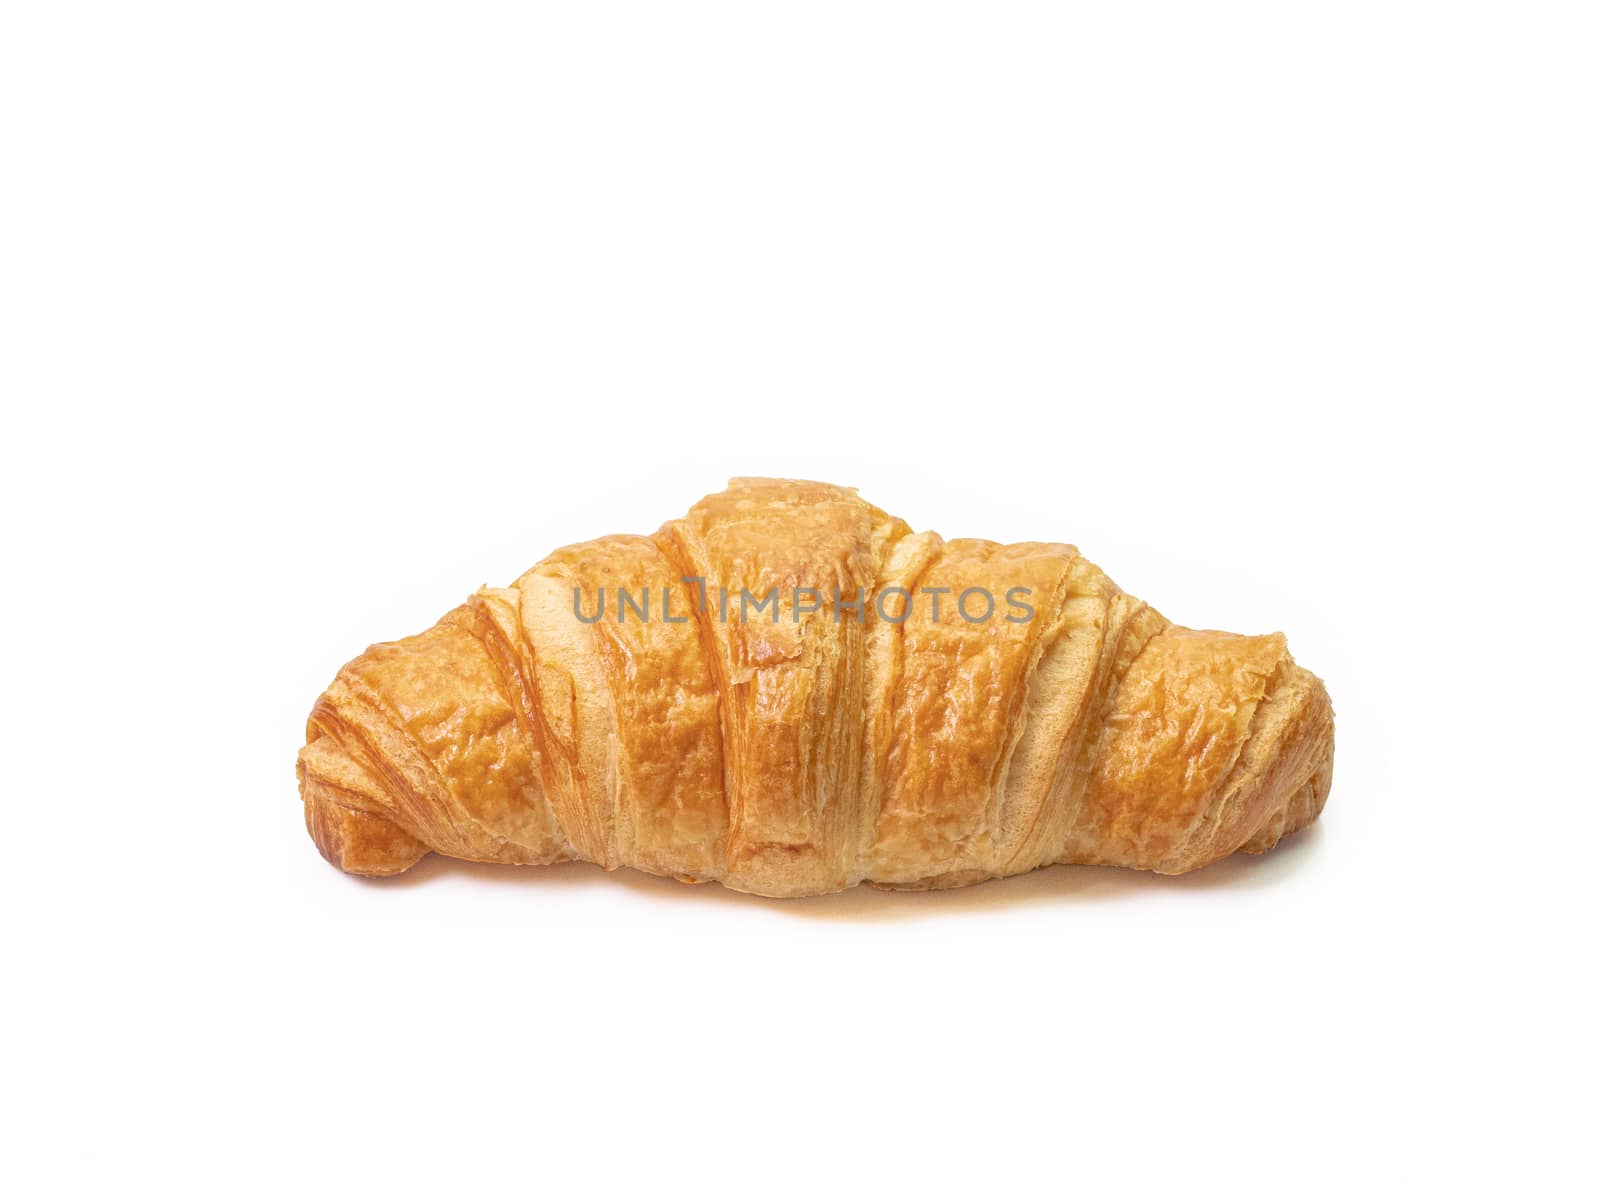 The delicious butter croissant bakery on white background. by phasuthorn